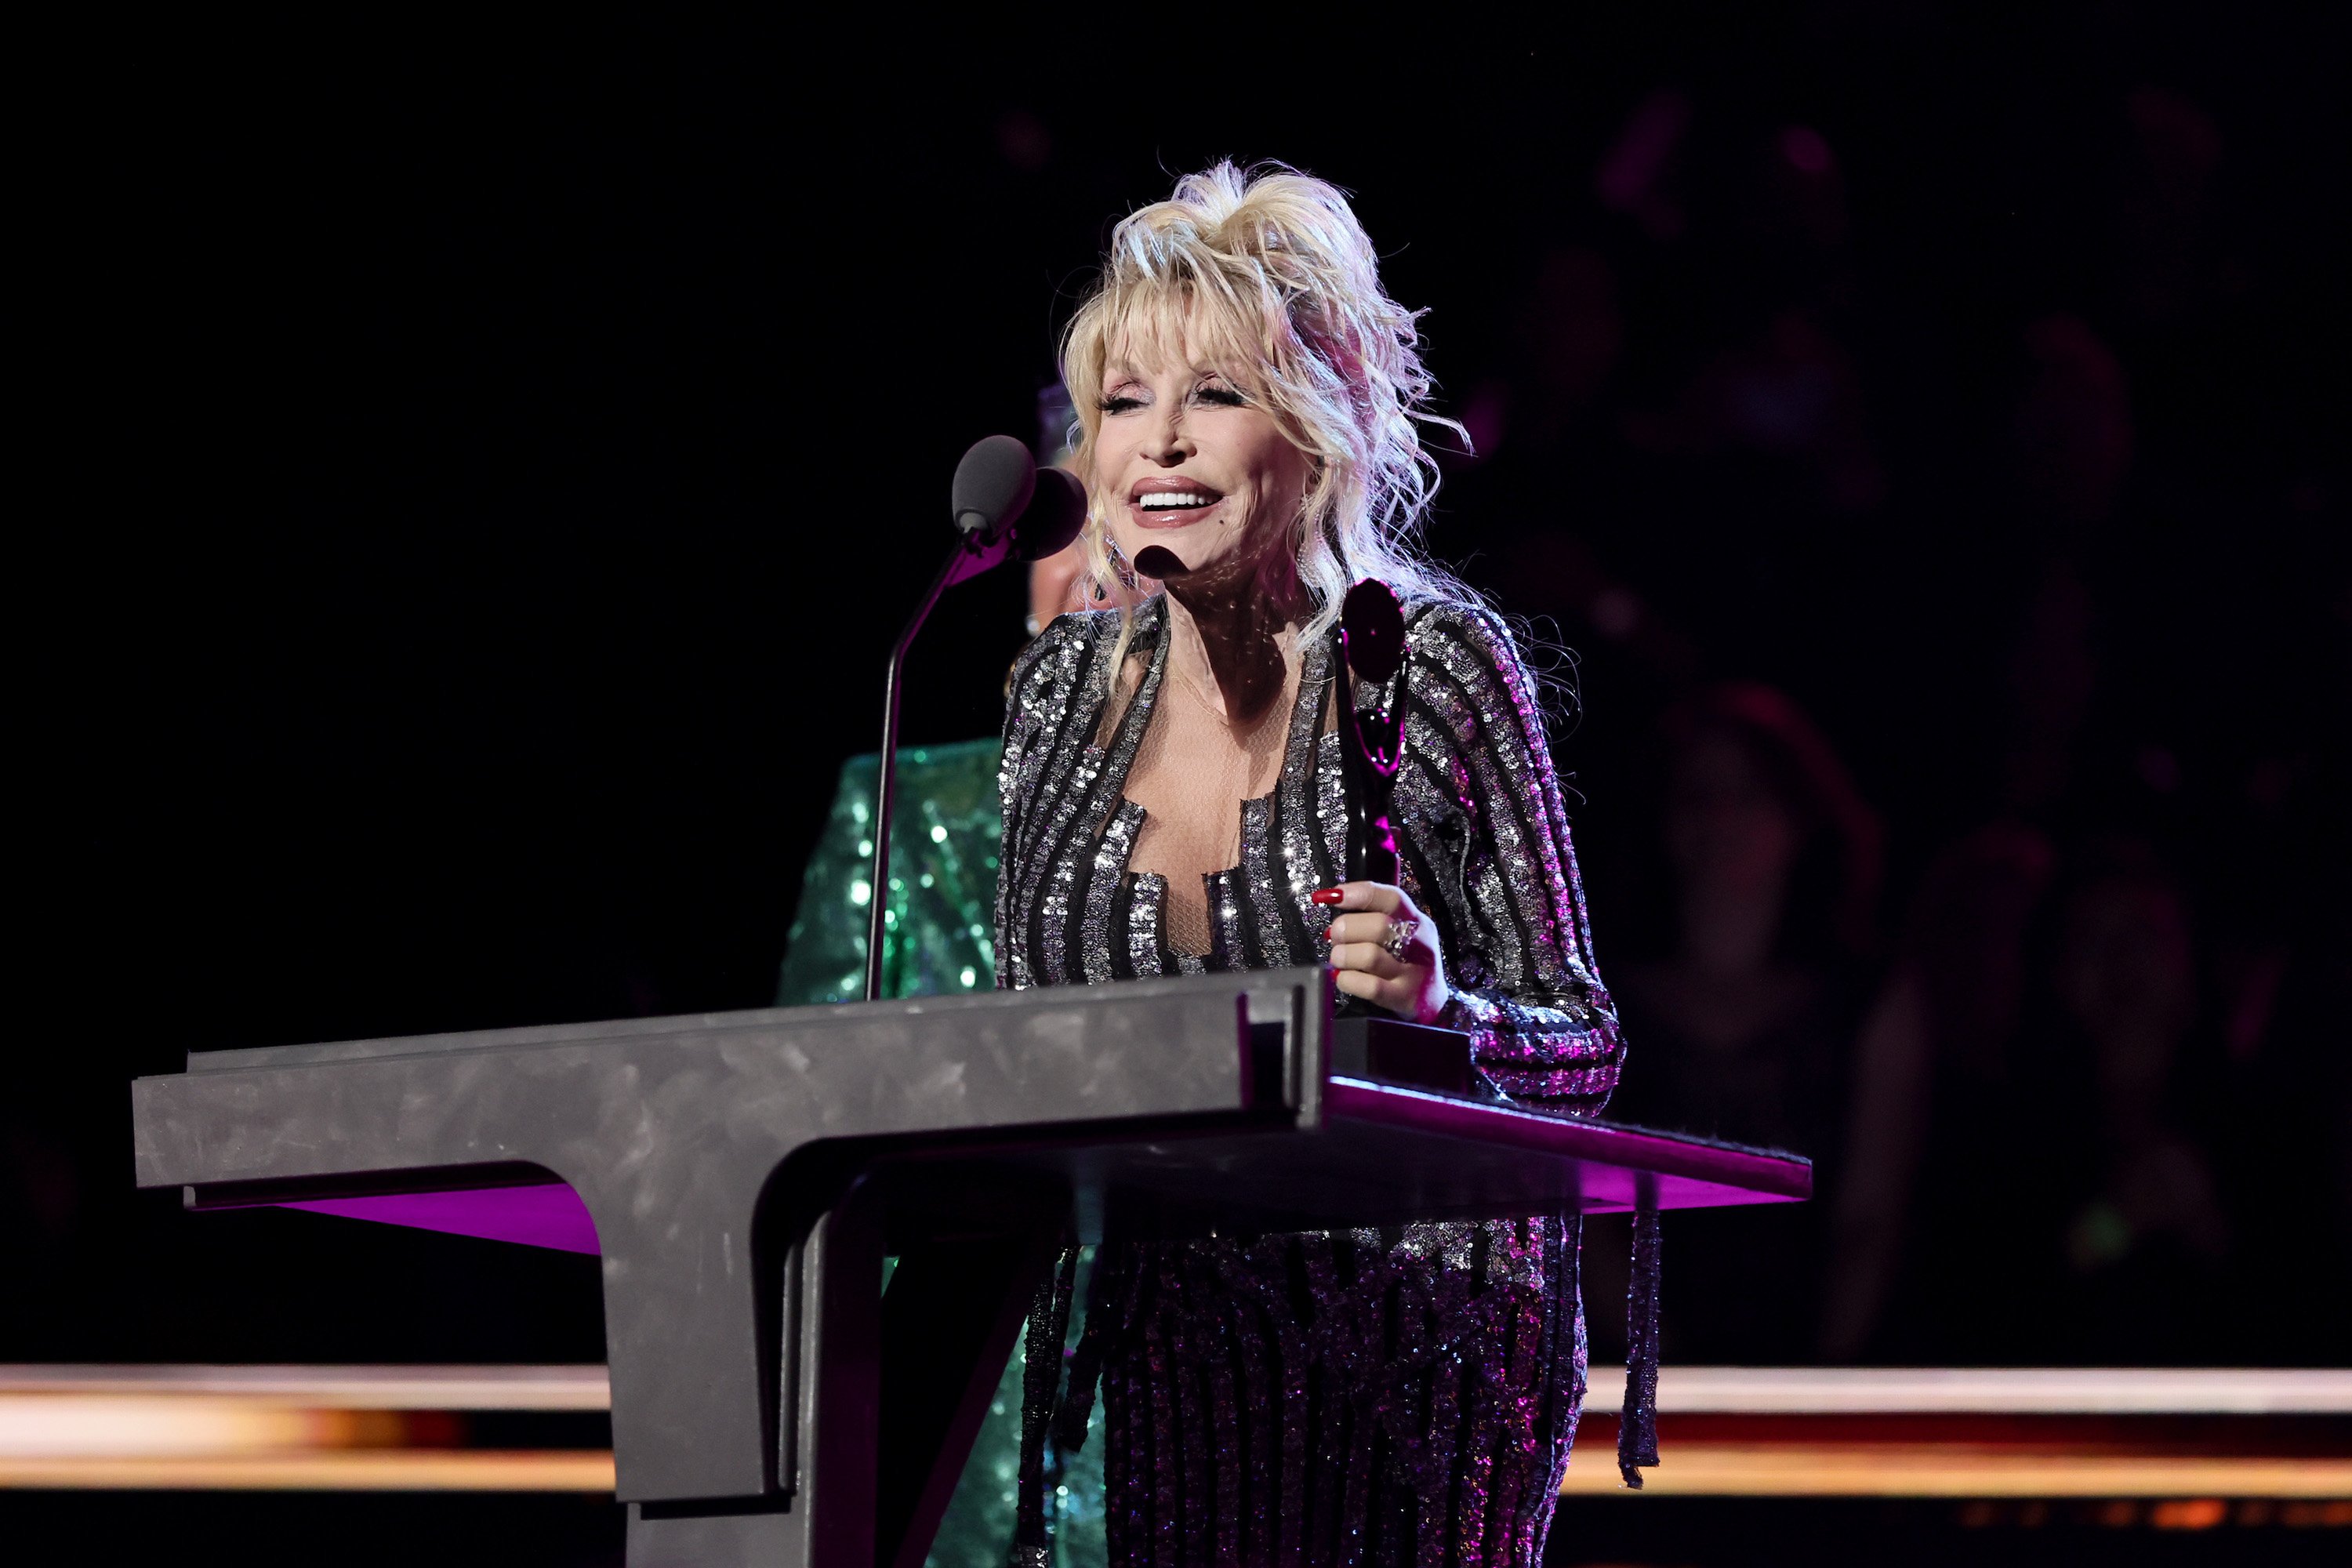 Dolly Parton Reveals Plans to Open ‘Dolly Center’ in Nashville, Along With a New Museum